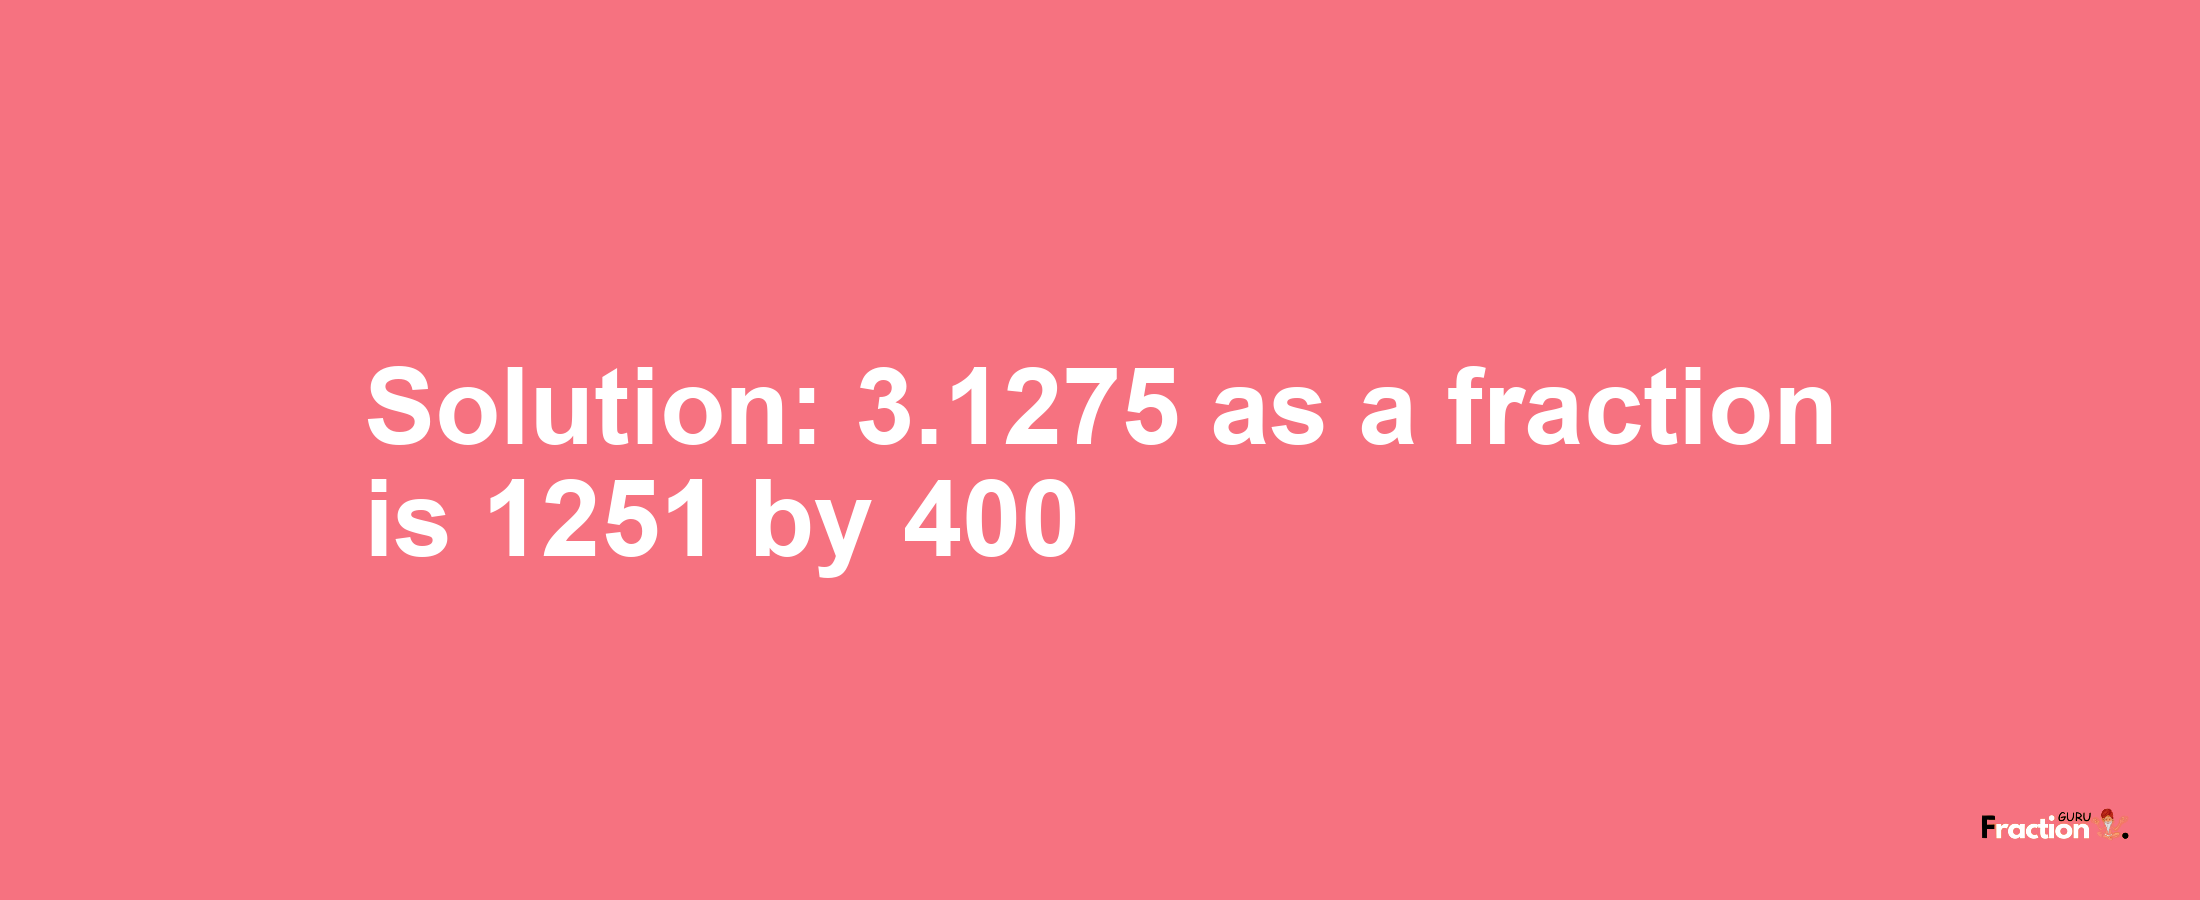 Solution:3.1275 as a fraction is 1251/400